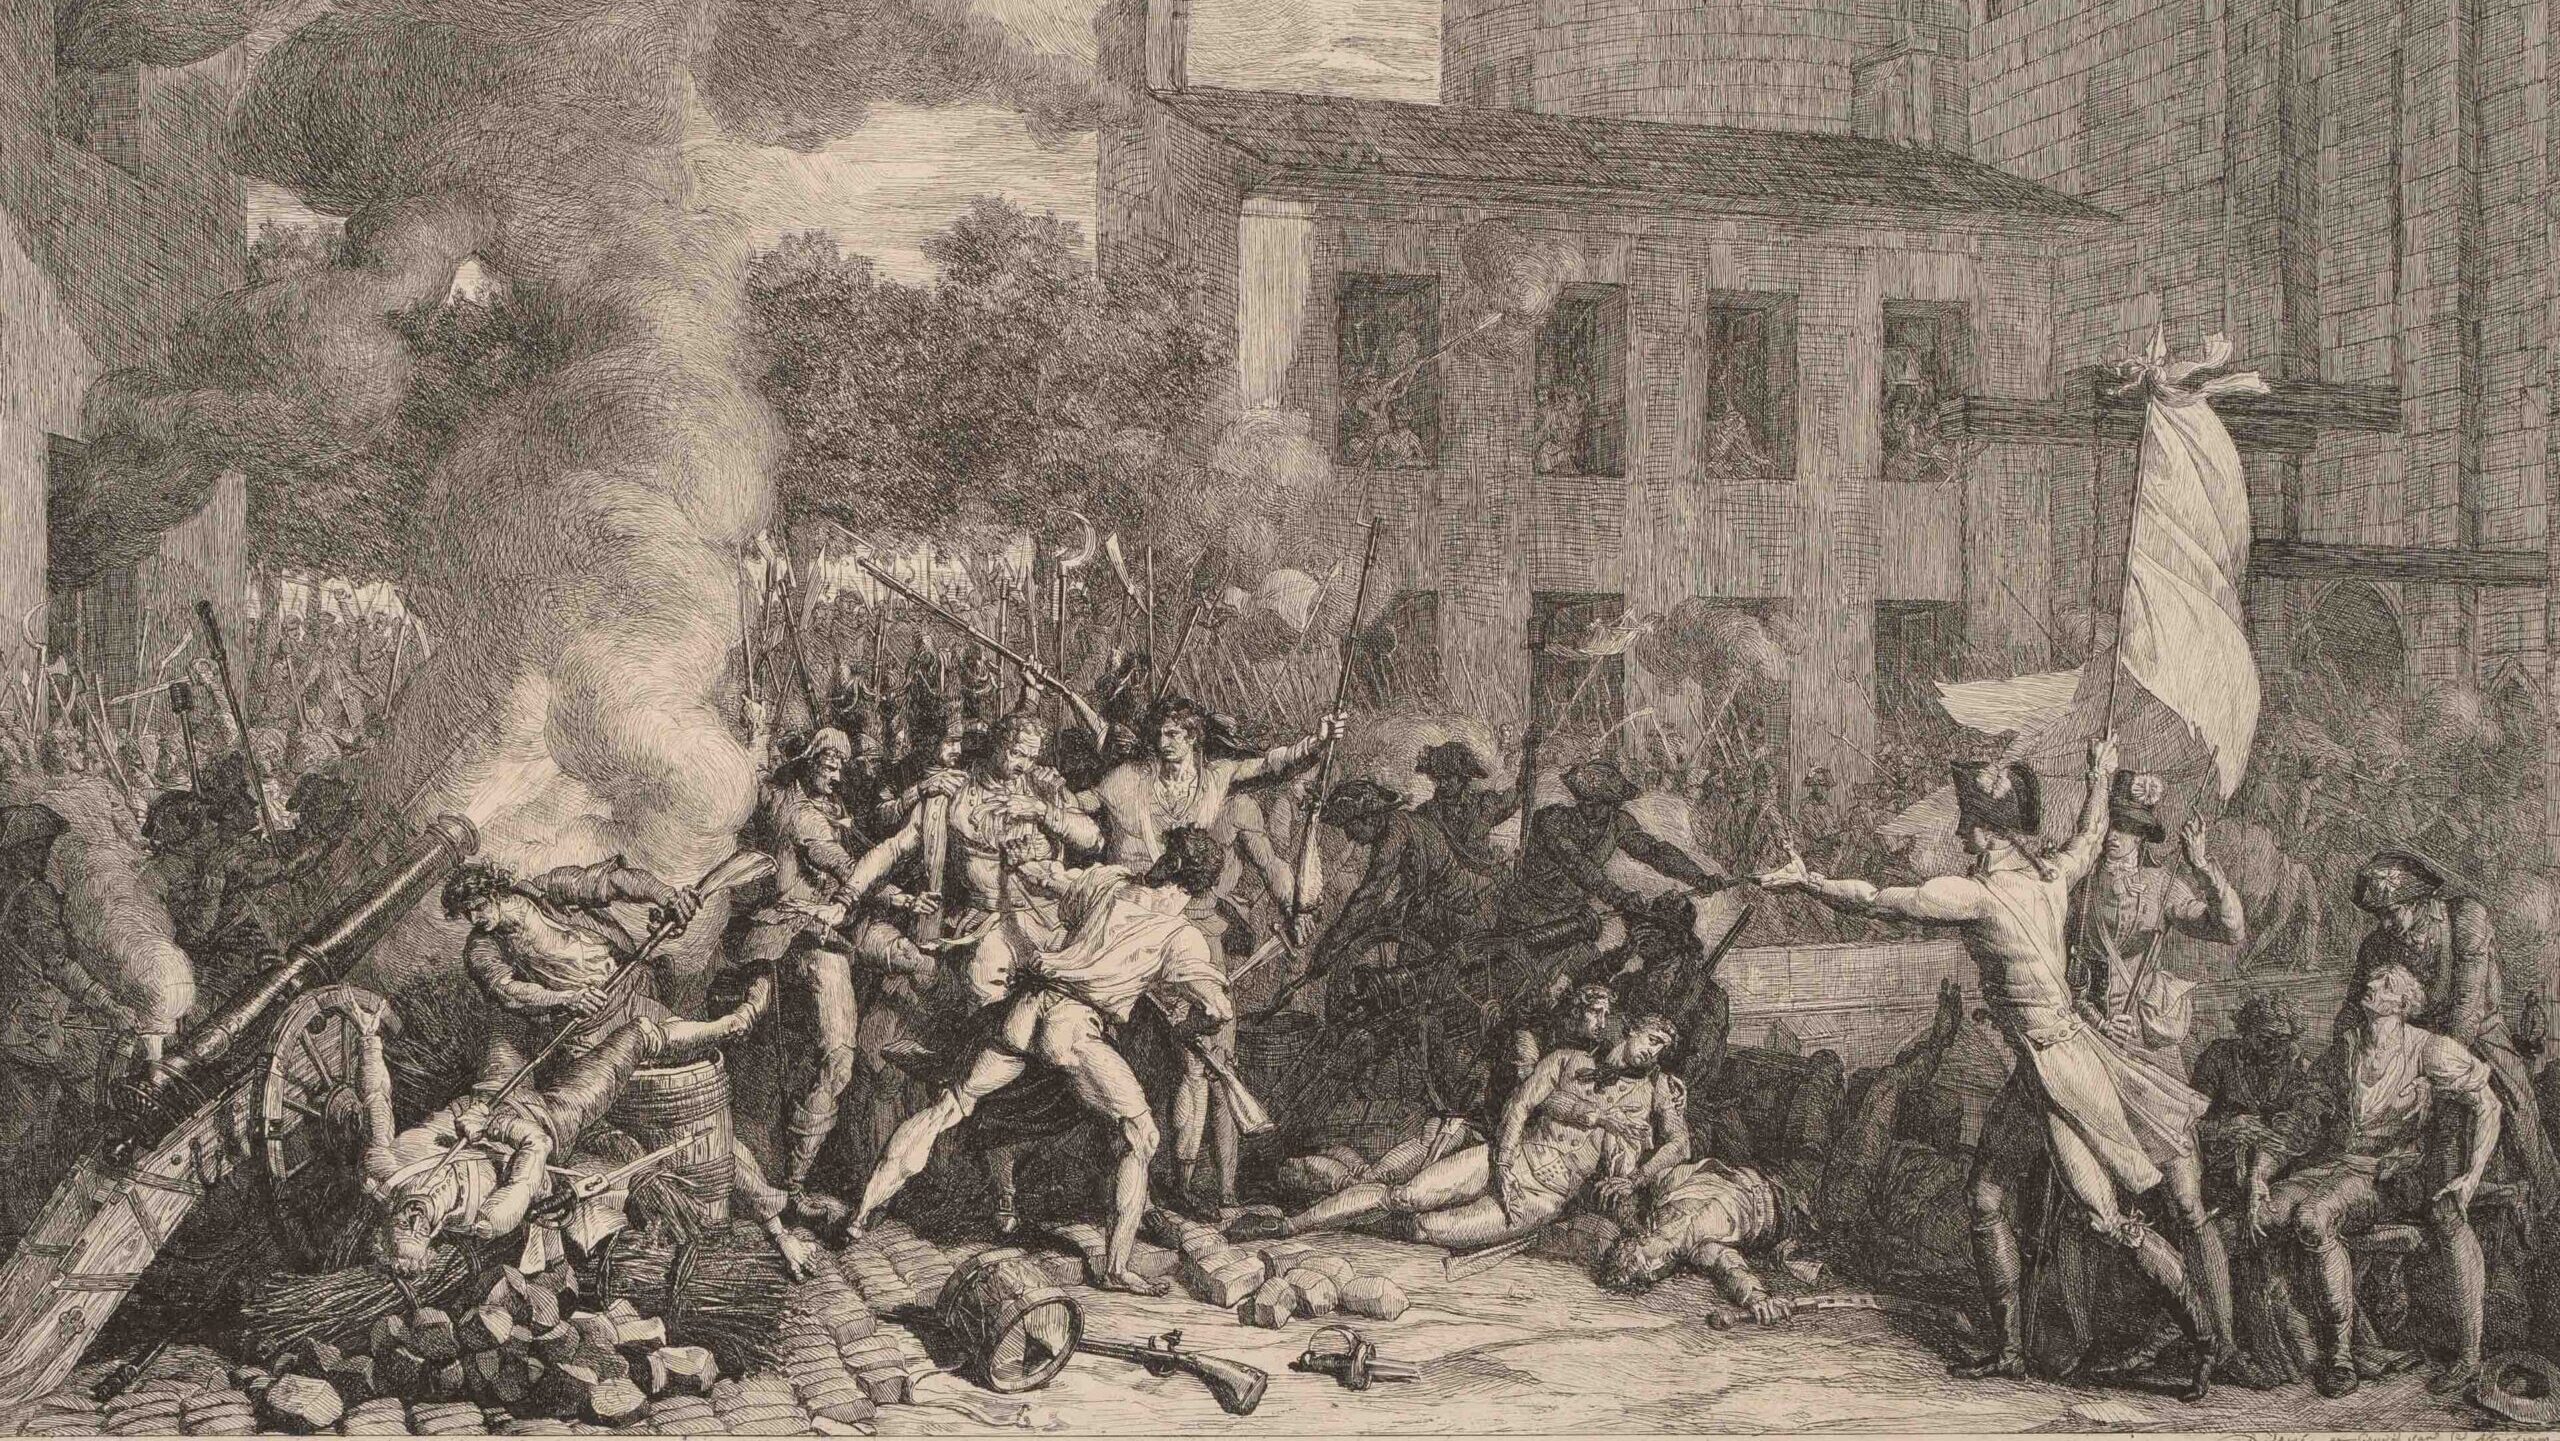 A black and white etching shows a crowd of people storming a prison during the French Revolution. Smoke rises and chaos reigns.